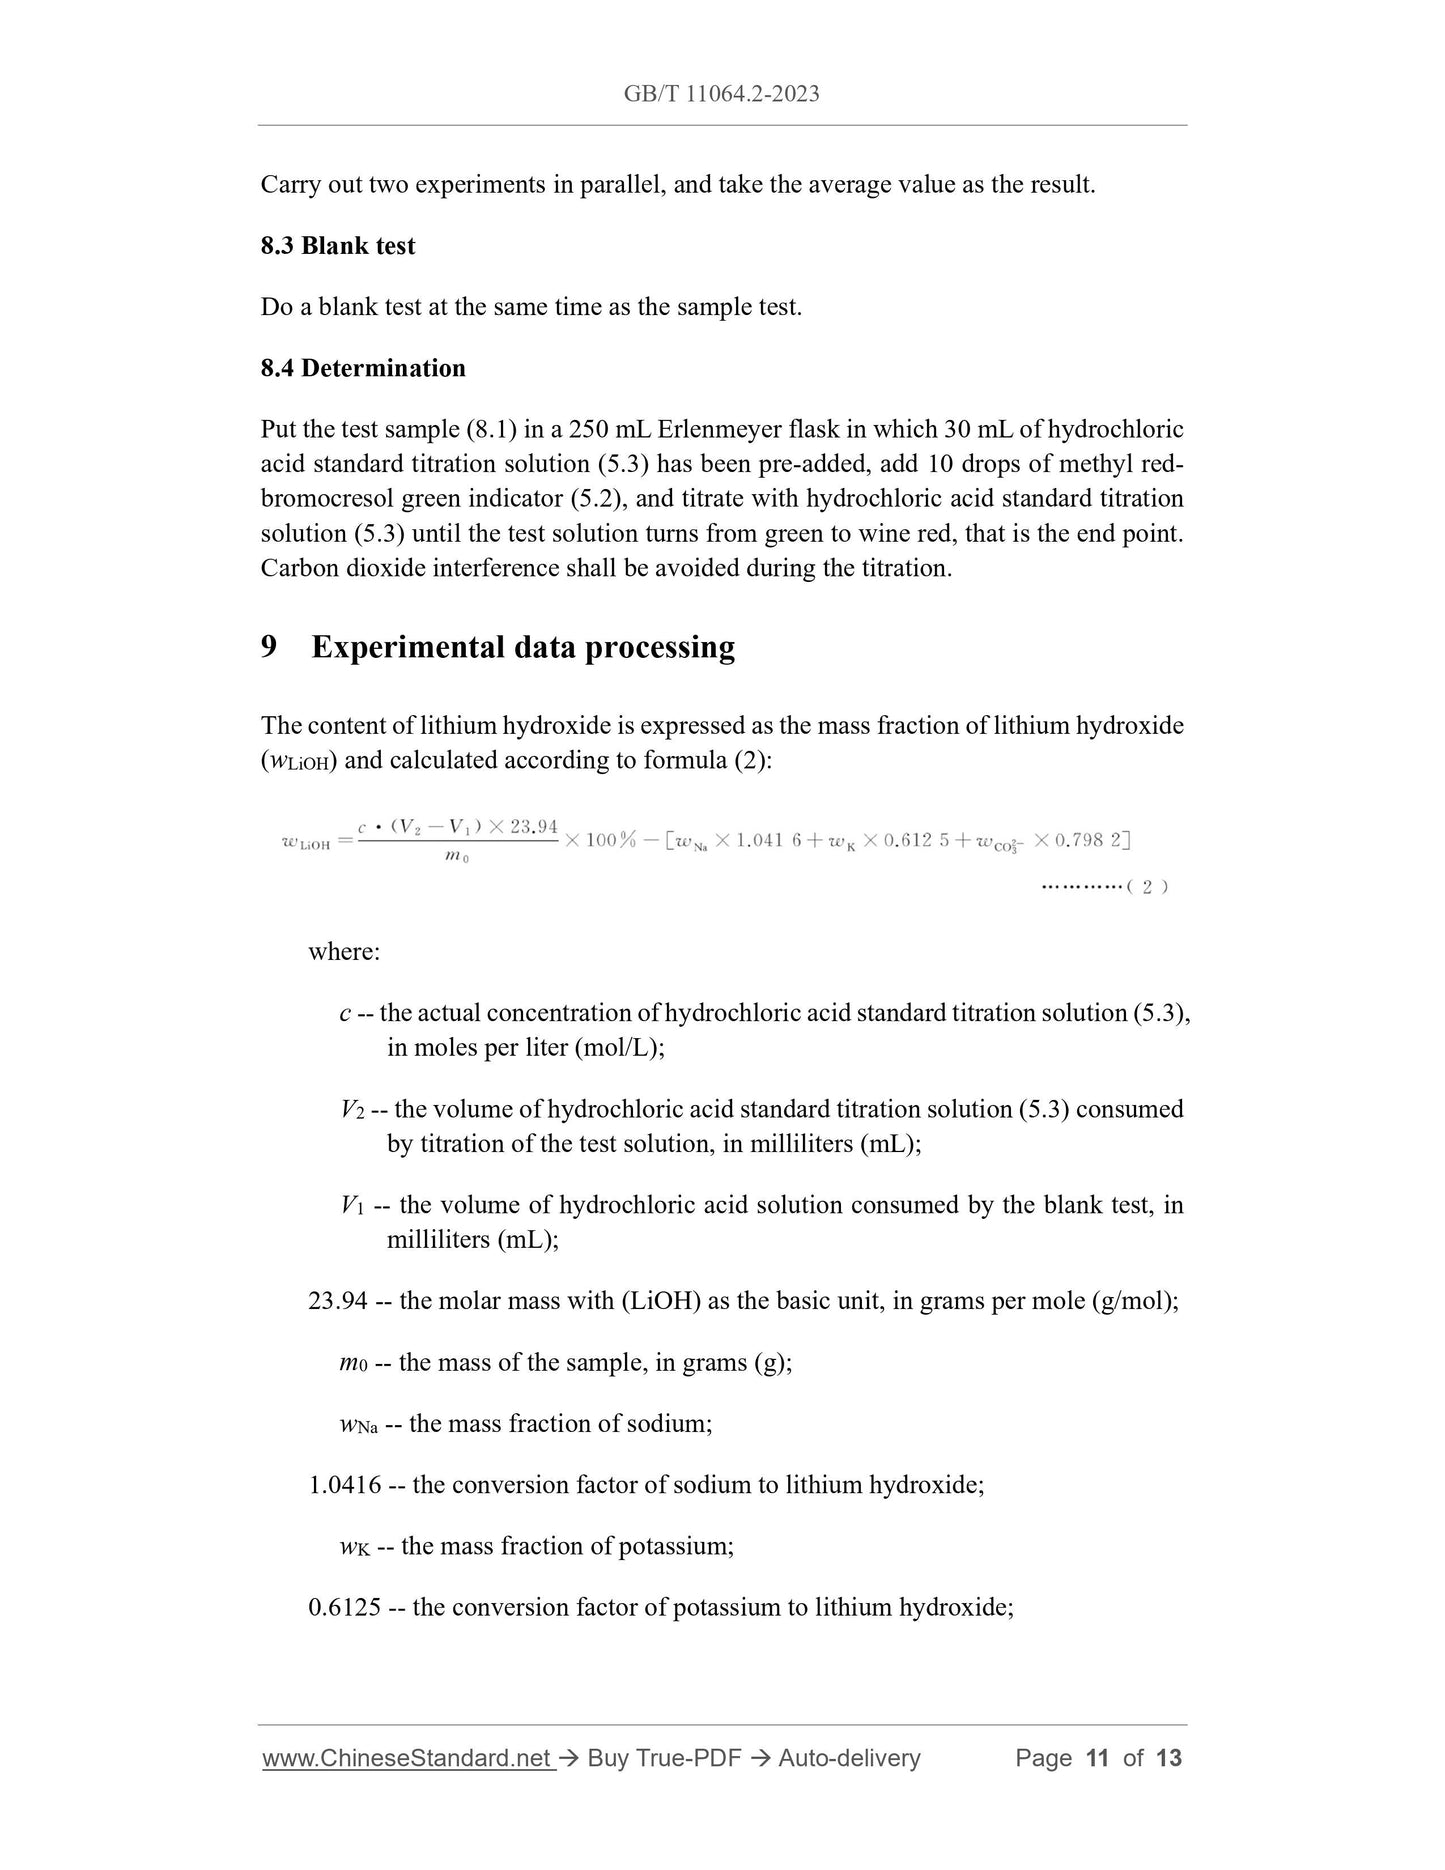 GB/T 11064.2-2023 Page 5